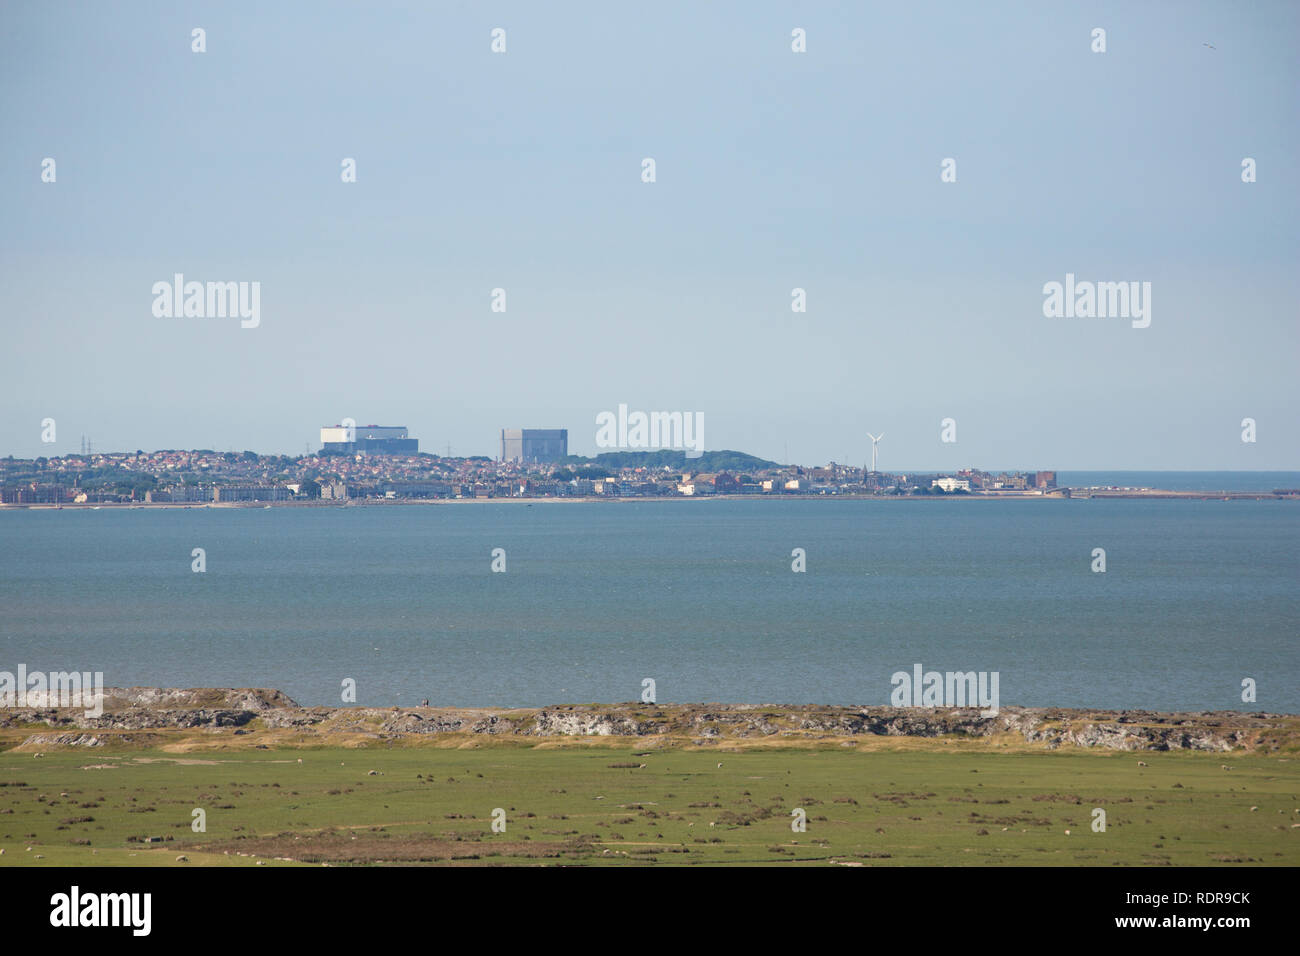 A view across saltmarshes on a hot and hazy day from Warton Crag of Heysham nuclear power station with part of Morecambe in the foreground. Lancashire Stock Photo